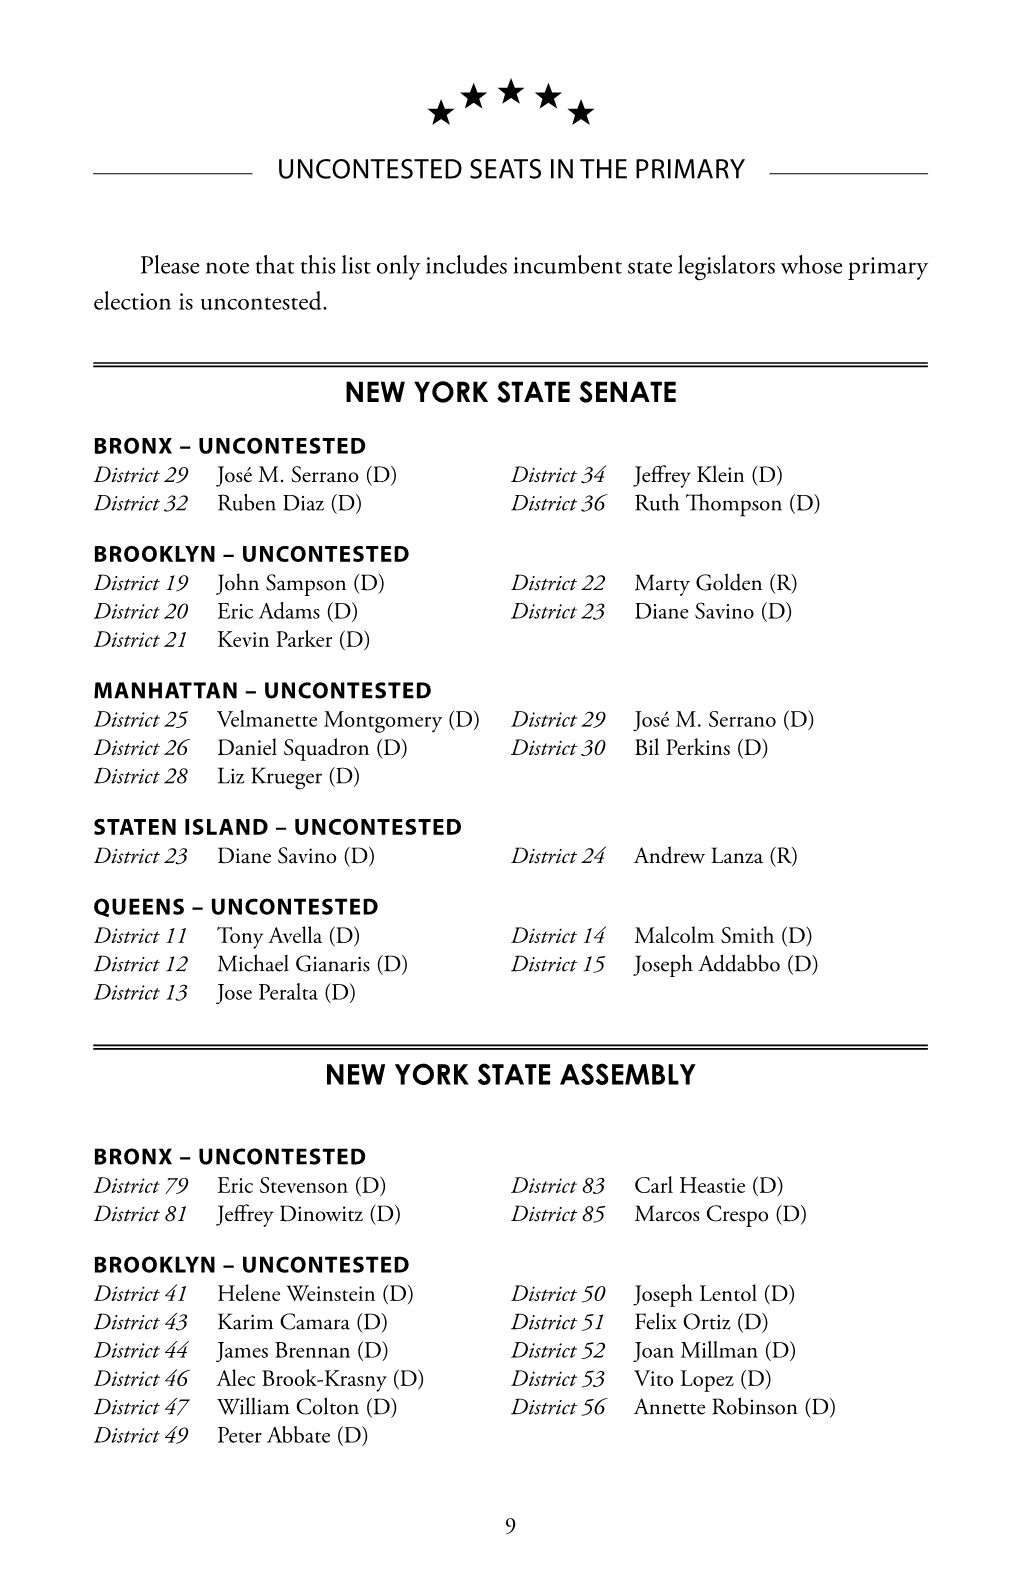 UNCONTESTED SEATS in the Primary NEW